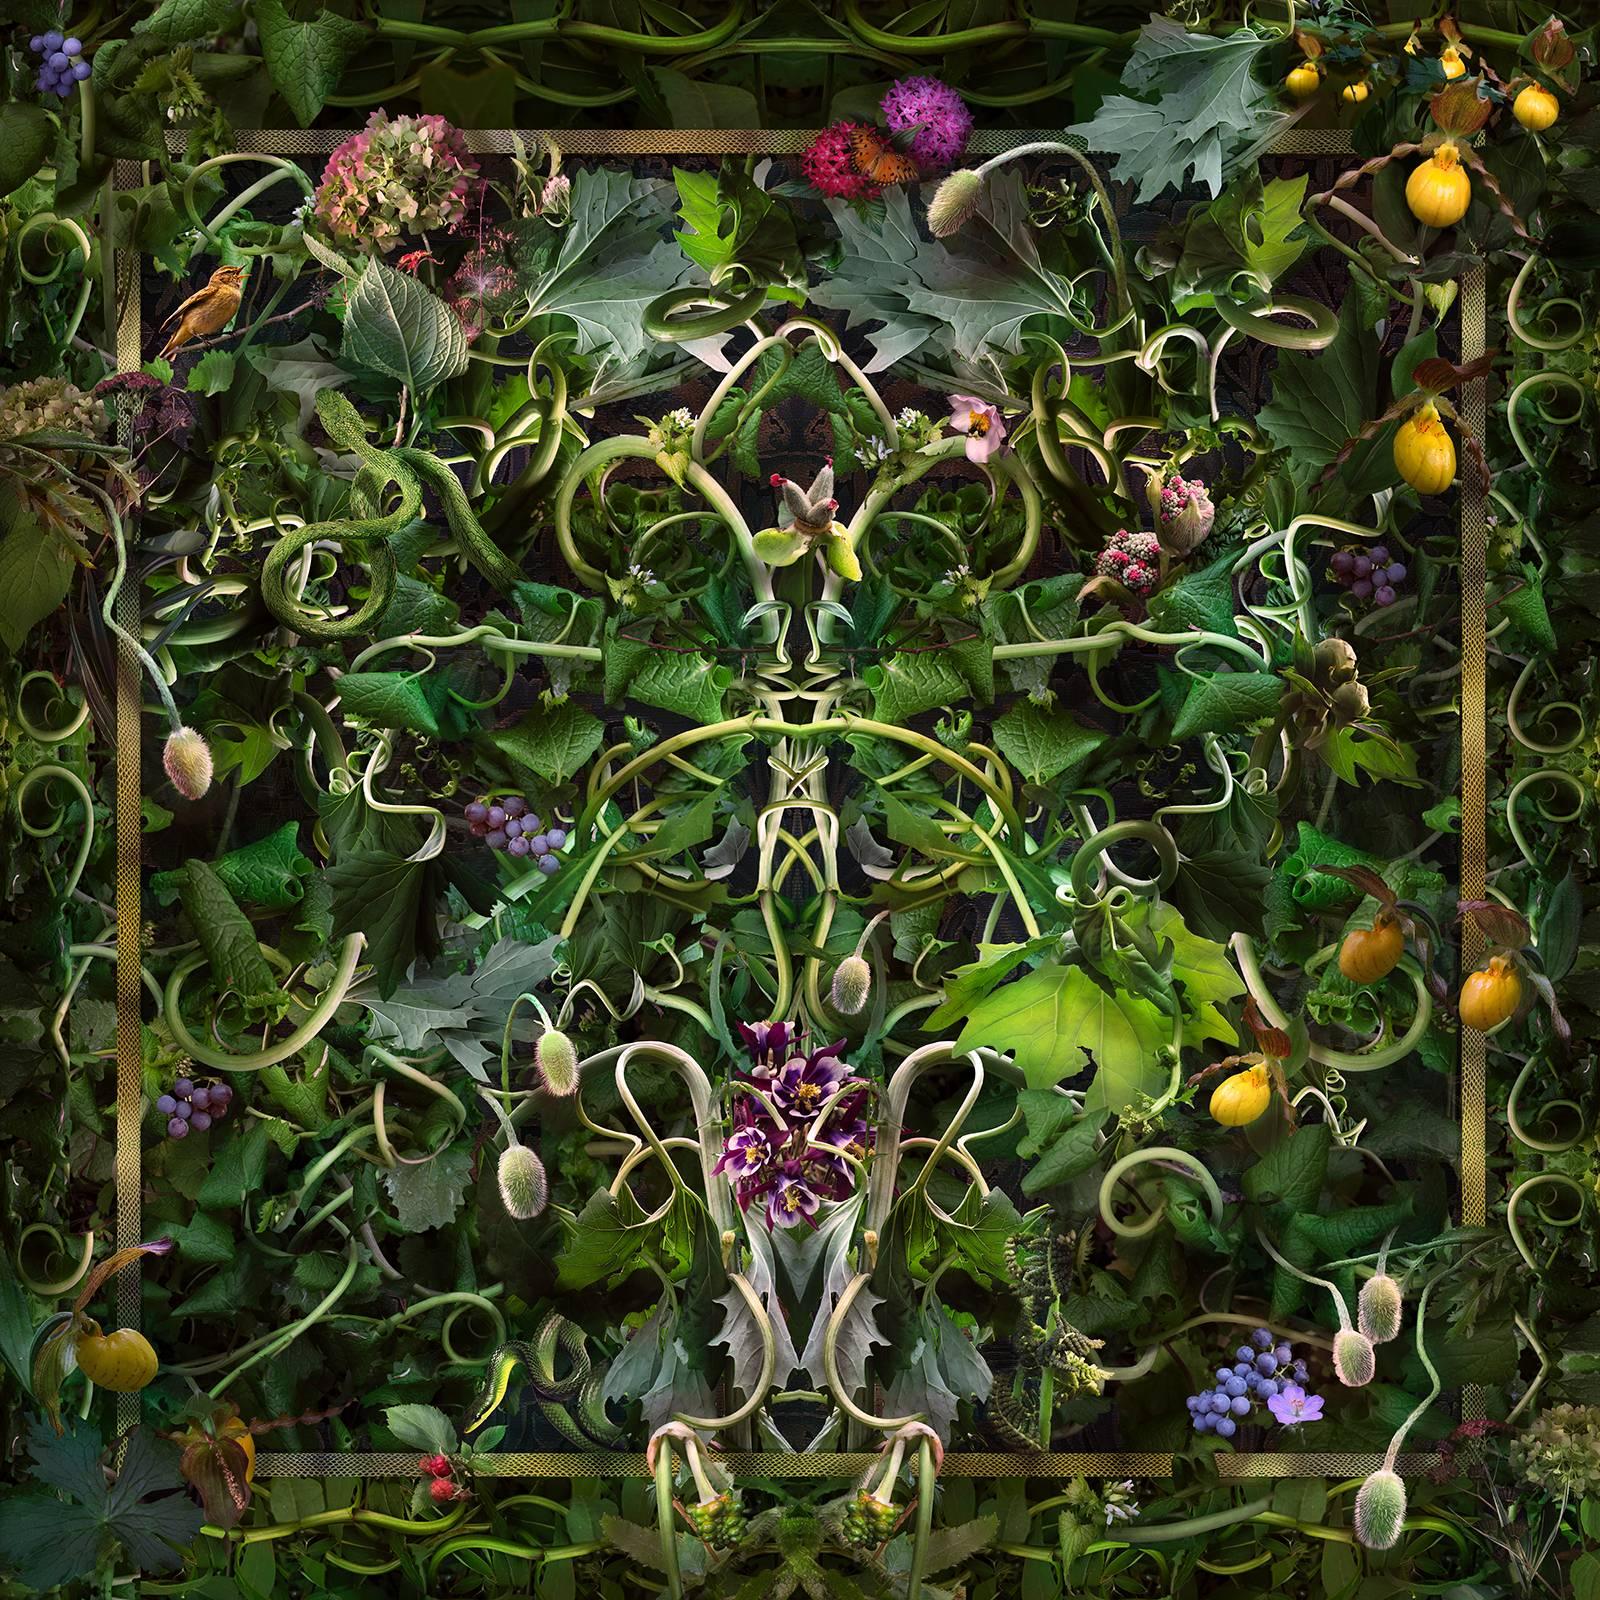 Feared, Loved (Abstract Baroque Style Still Life Photo of Green Vines & Flowers)